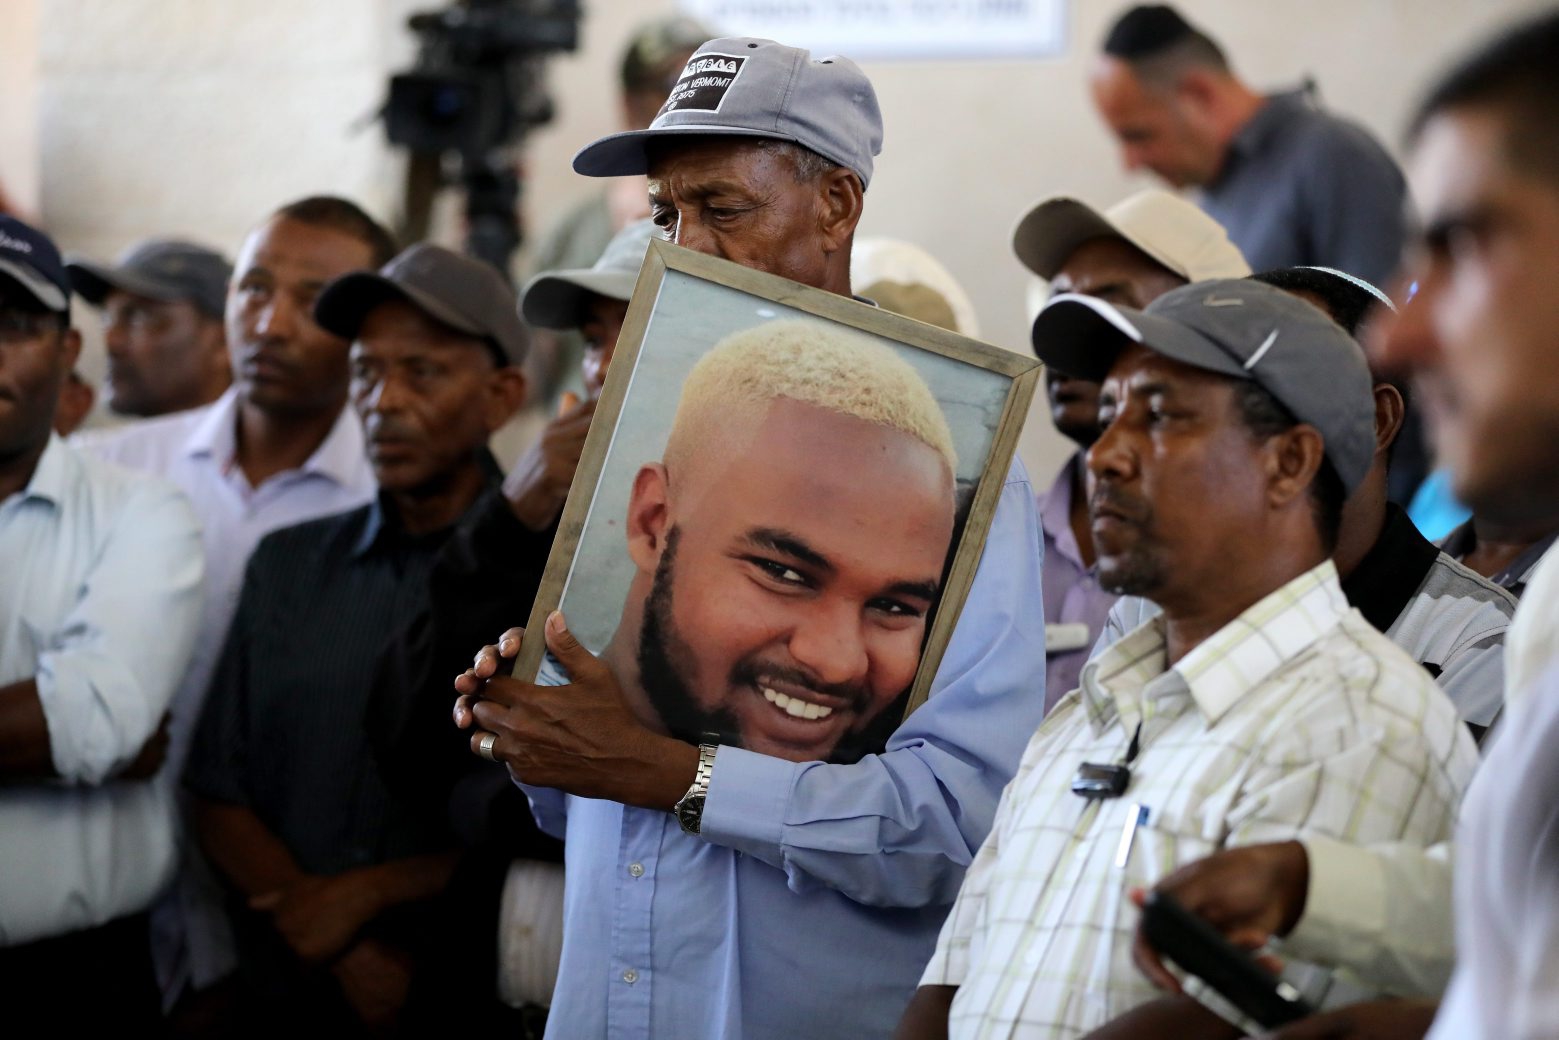 epa07689267 Family members and friends hold a picture and mourn during the funeral of Israeli teen of Ethiopian descent Salamon Taka at the Tel Regev cemetery near Haifa, Israel, 02 July 2019. Reports state the 18-year -old Taka was shot dead on 30 June by an off-duty police officer in Kiryat Haim, a suburb of Haifa. His death sparked a wave of protest throughout the country as thousands of the Ethiopian community blocked roads, shouted slogans and called for equality and a halt of excessive police violence.  EPA/ABIR SULTAN MIDEAST ISRAEL ETHIOPIANS PROTEST